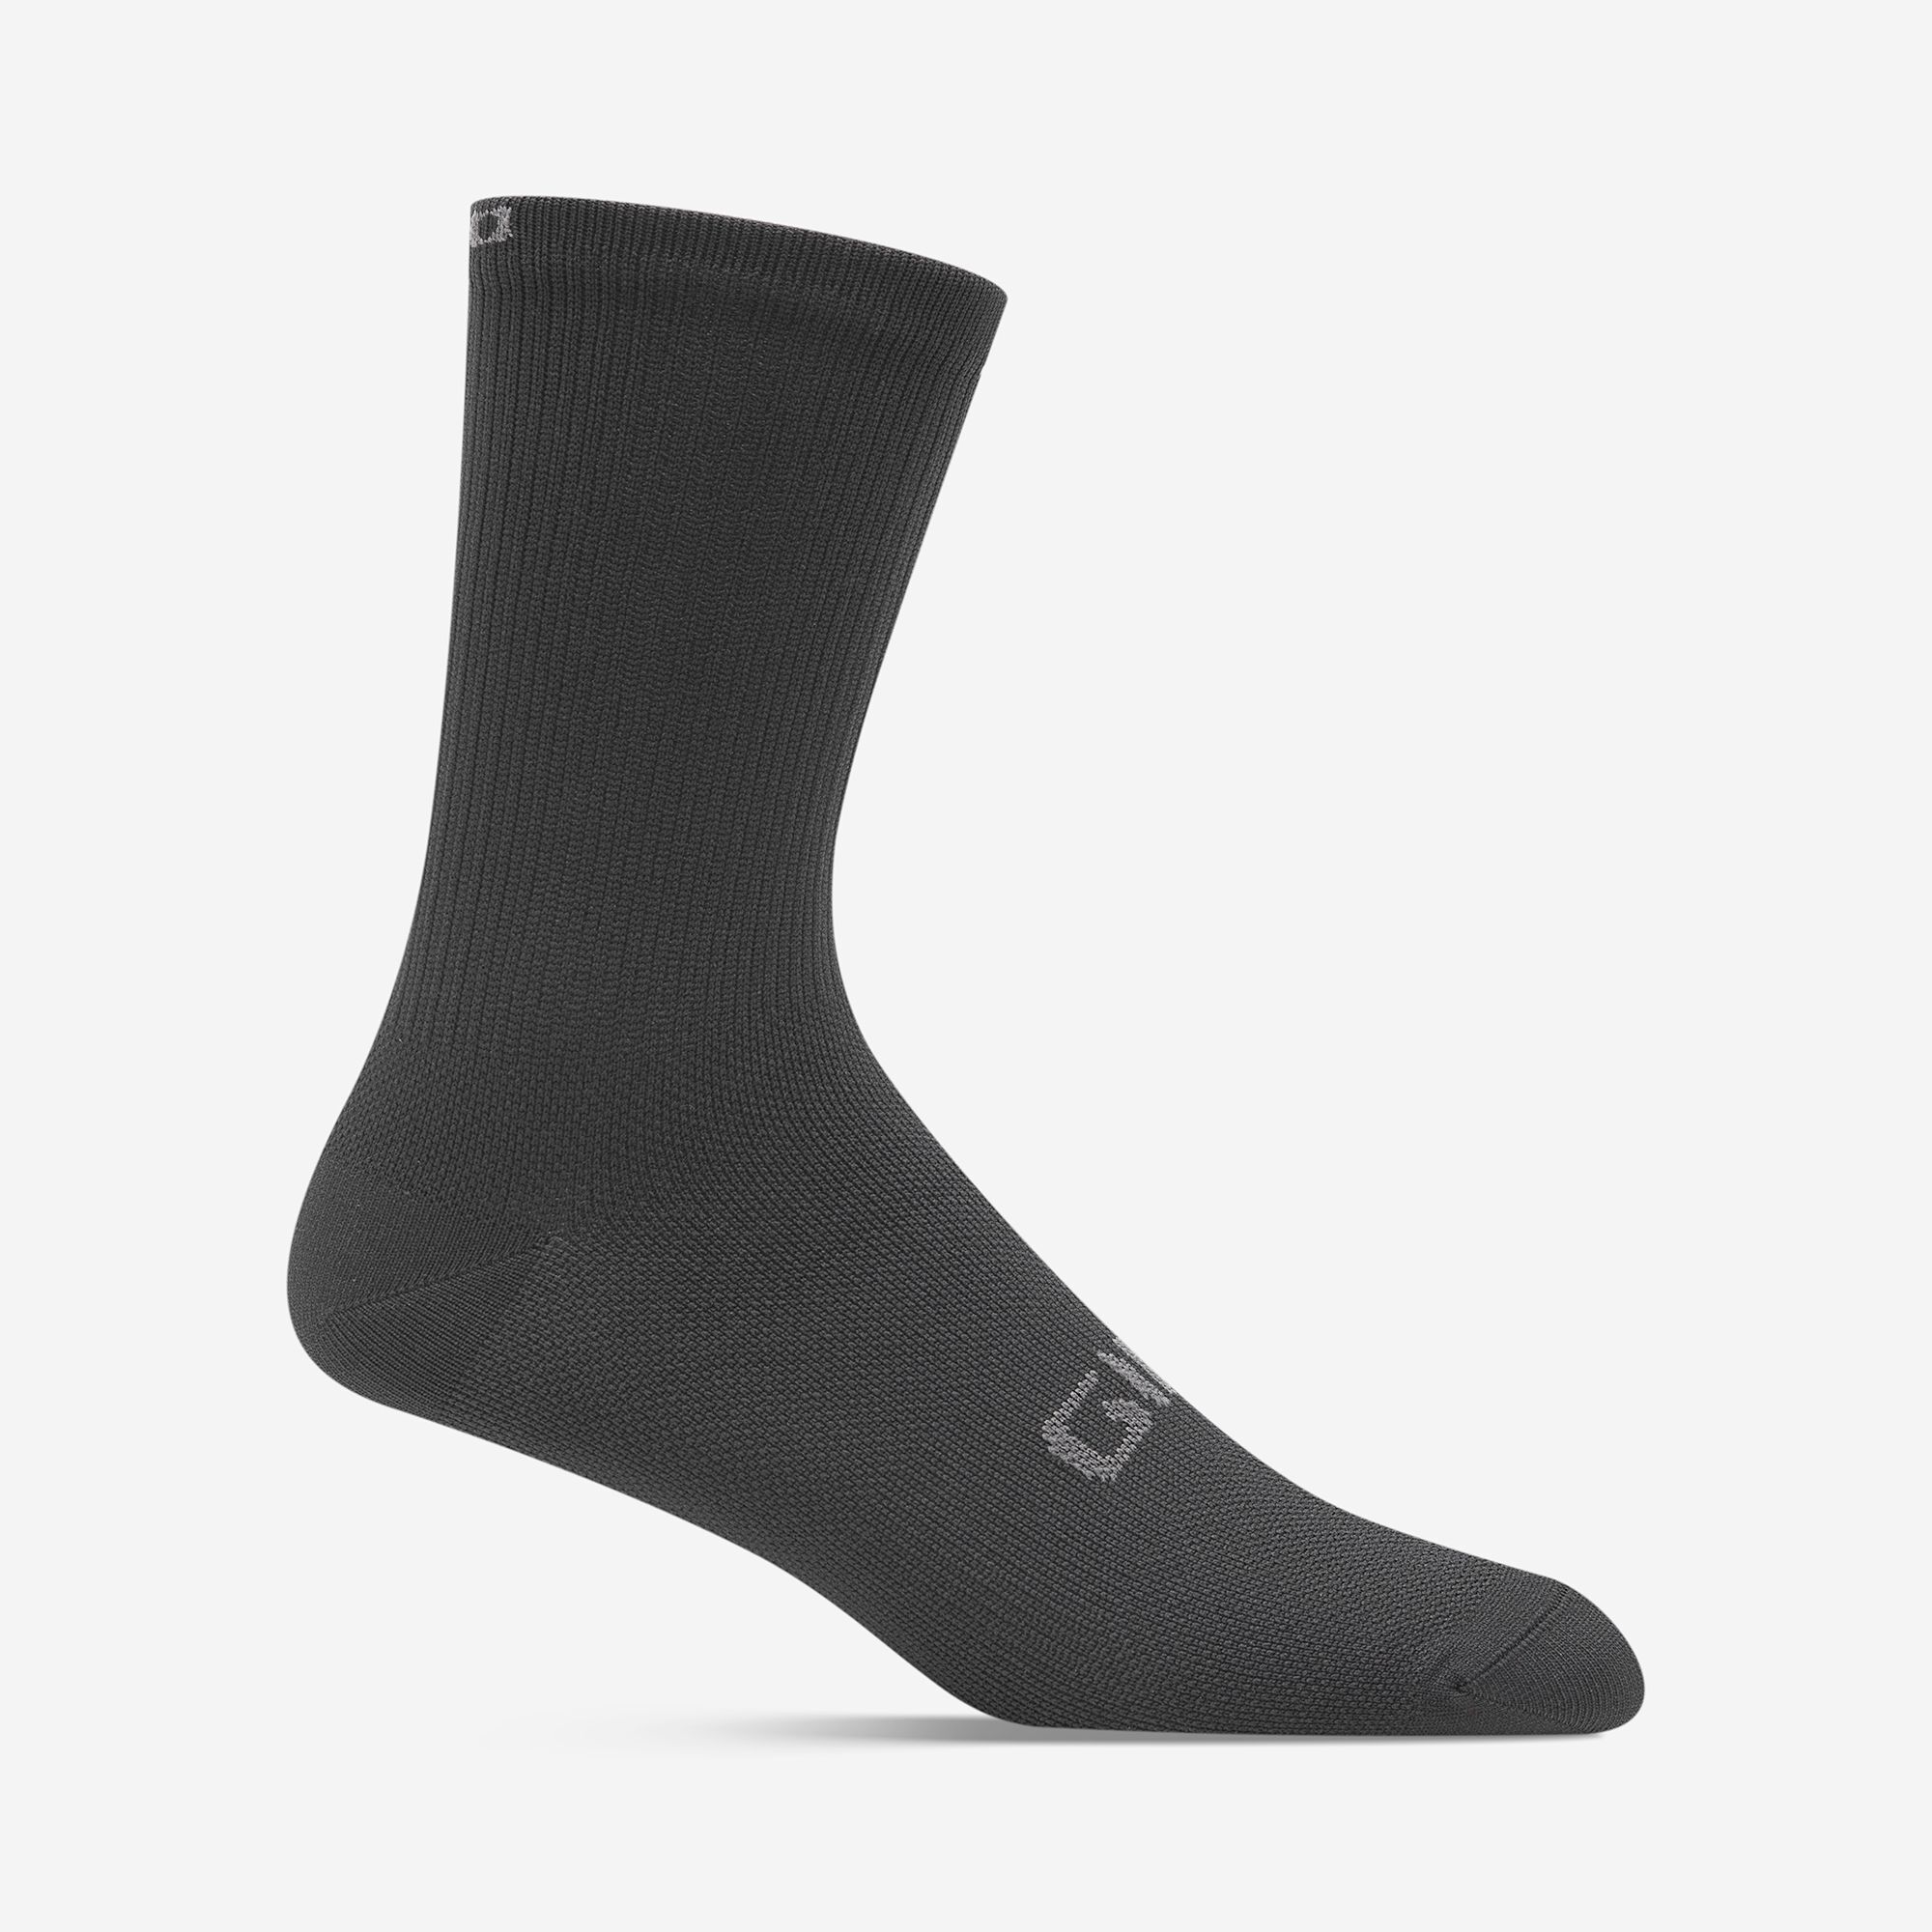 Soft feel 39-43.5 size Differnt colours Giro Cycling Socks shoes 